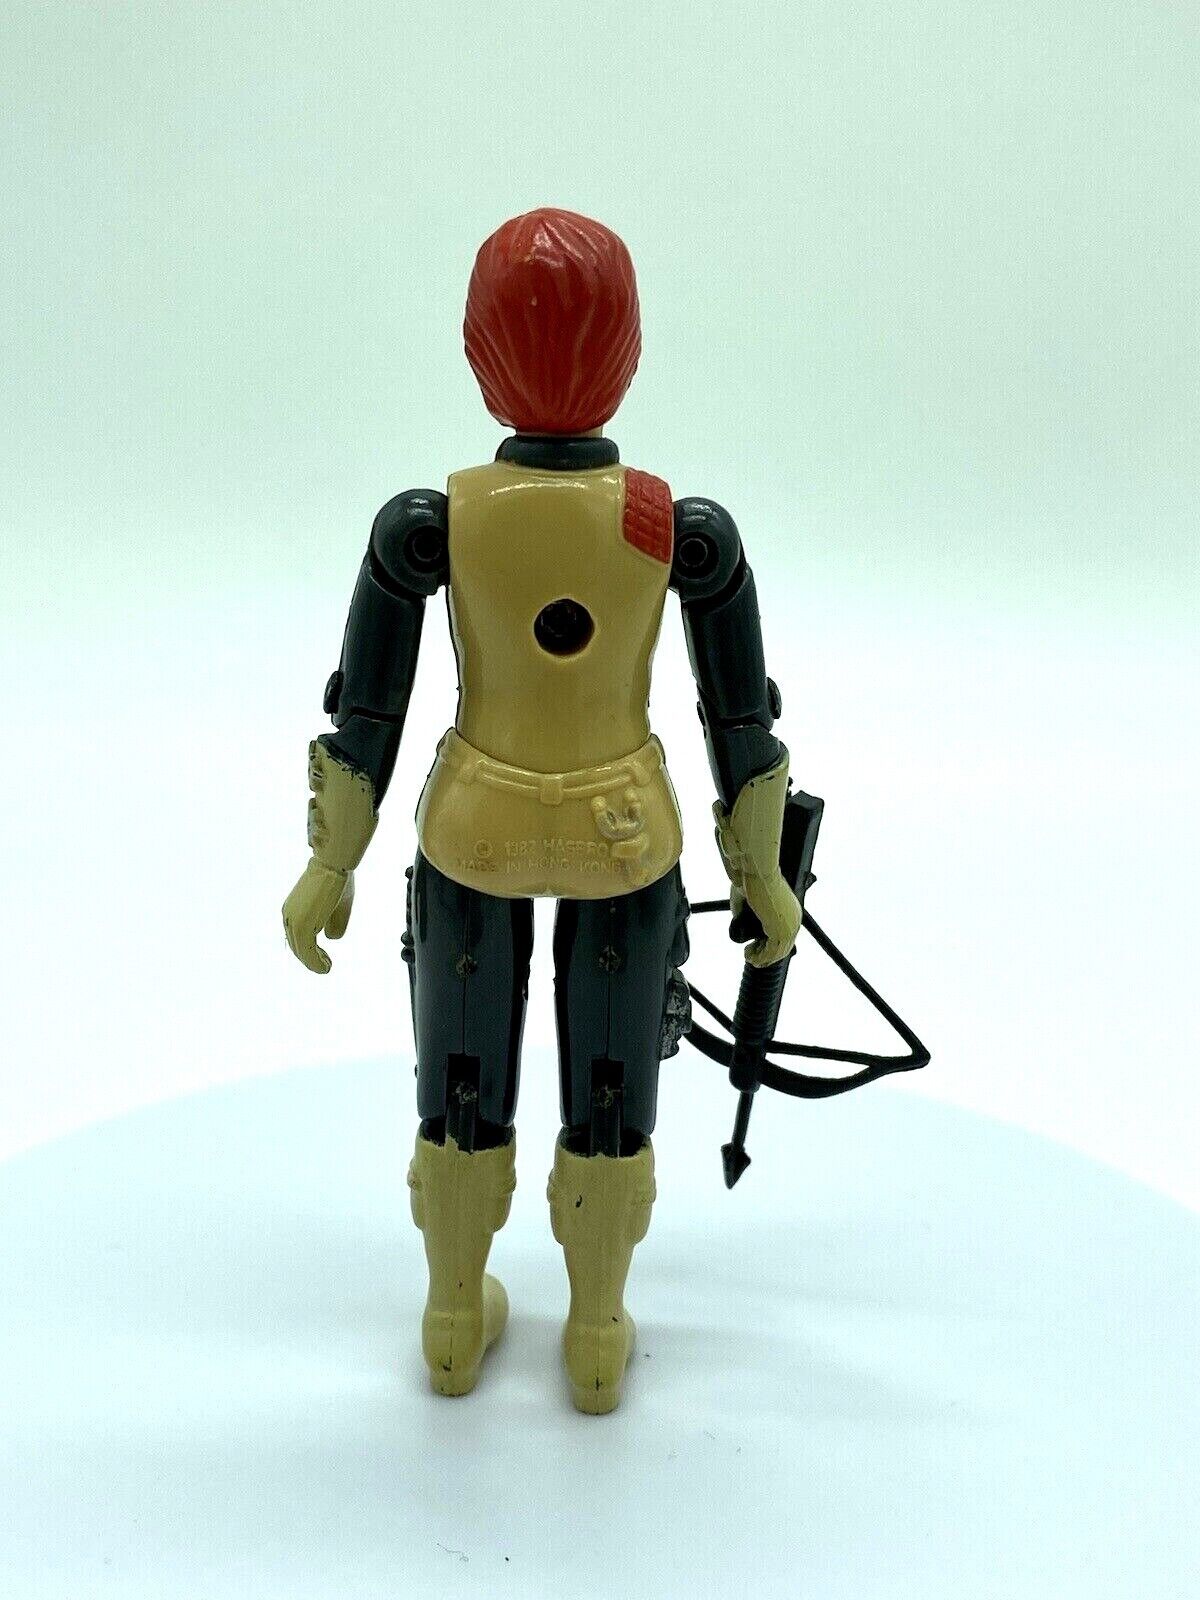 G.I. Joe Scarlett Straight arm version complete with file card